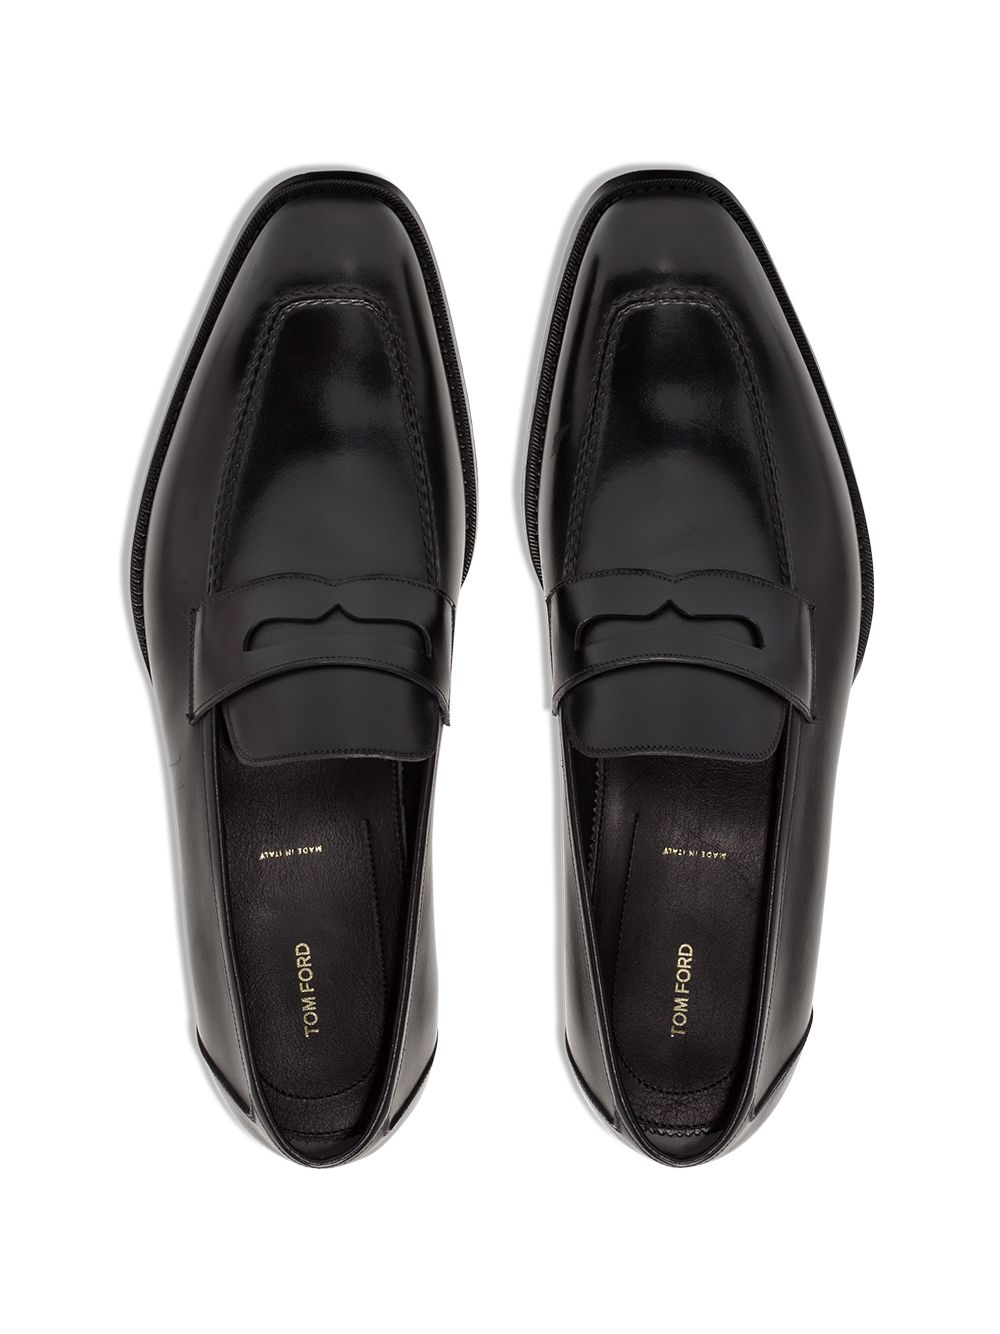 Shop TOM FORD Wessex penny loafers with Express Delivery - FARFETCH